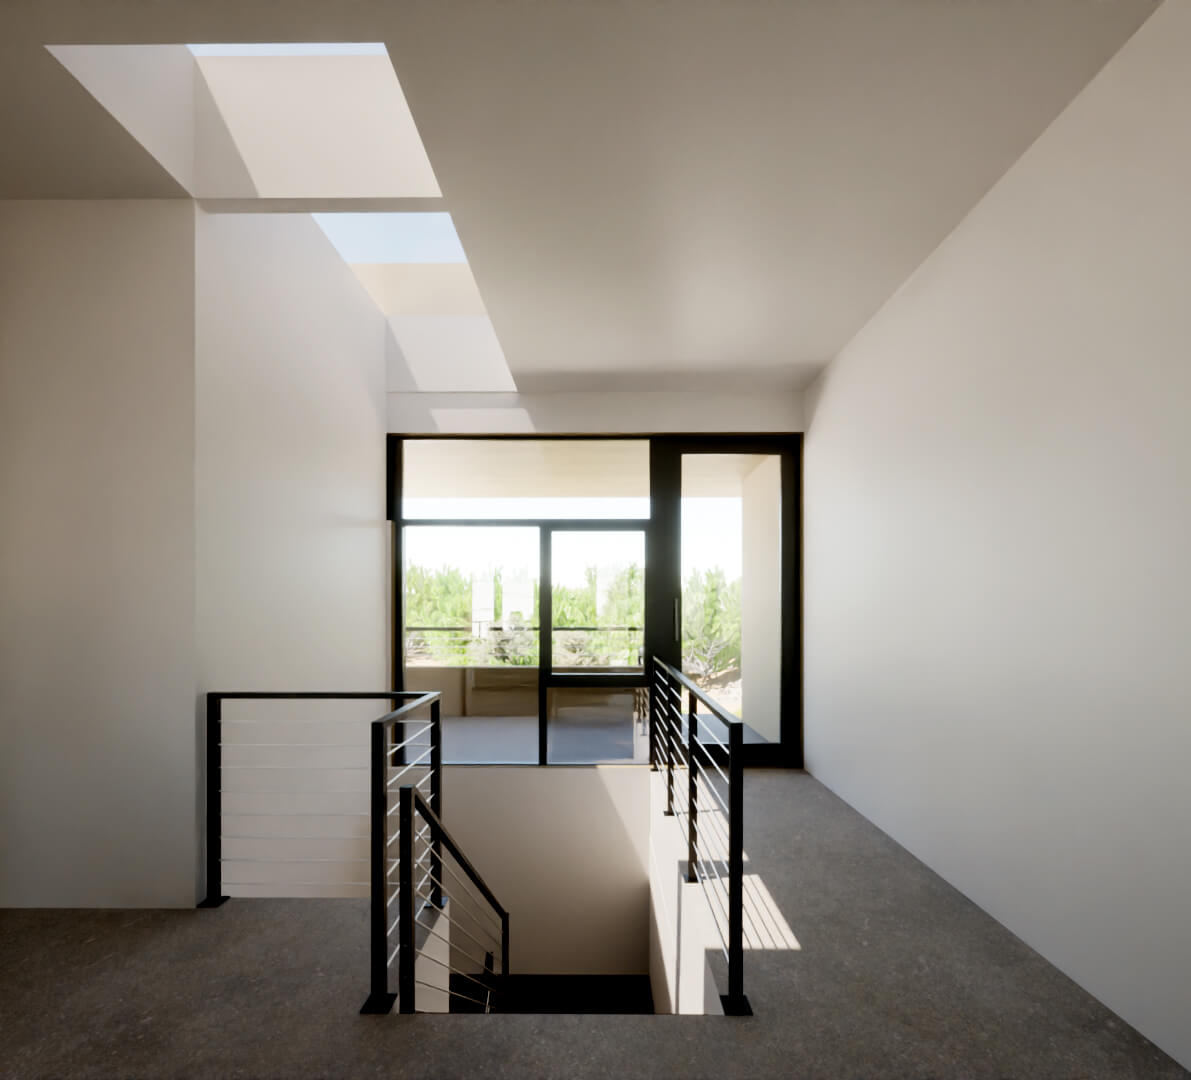 A Santa Fe home designer's architectural masterpiece, featuring a stunning image of a hallway illuminated by a magnificent skylight.